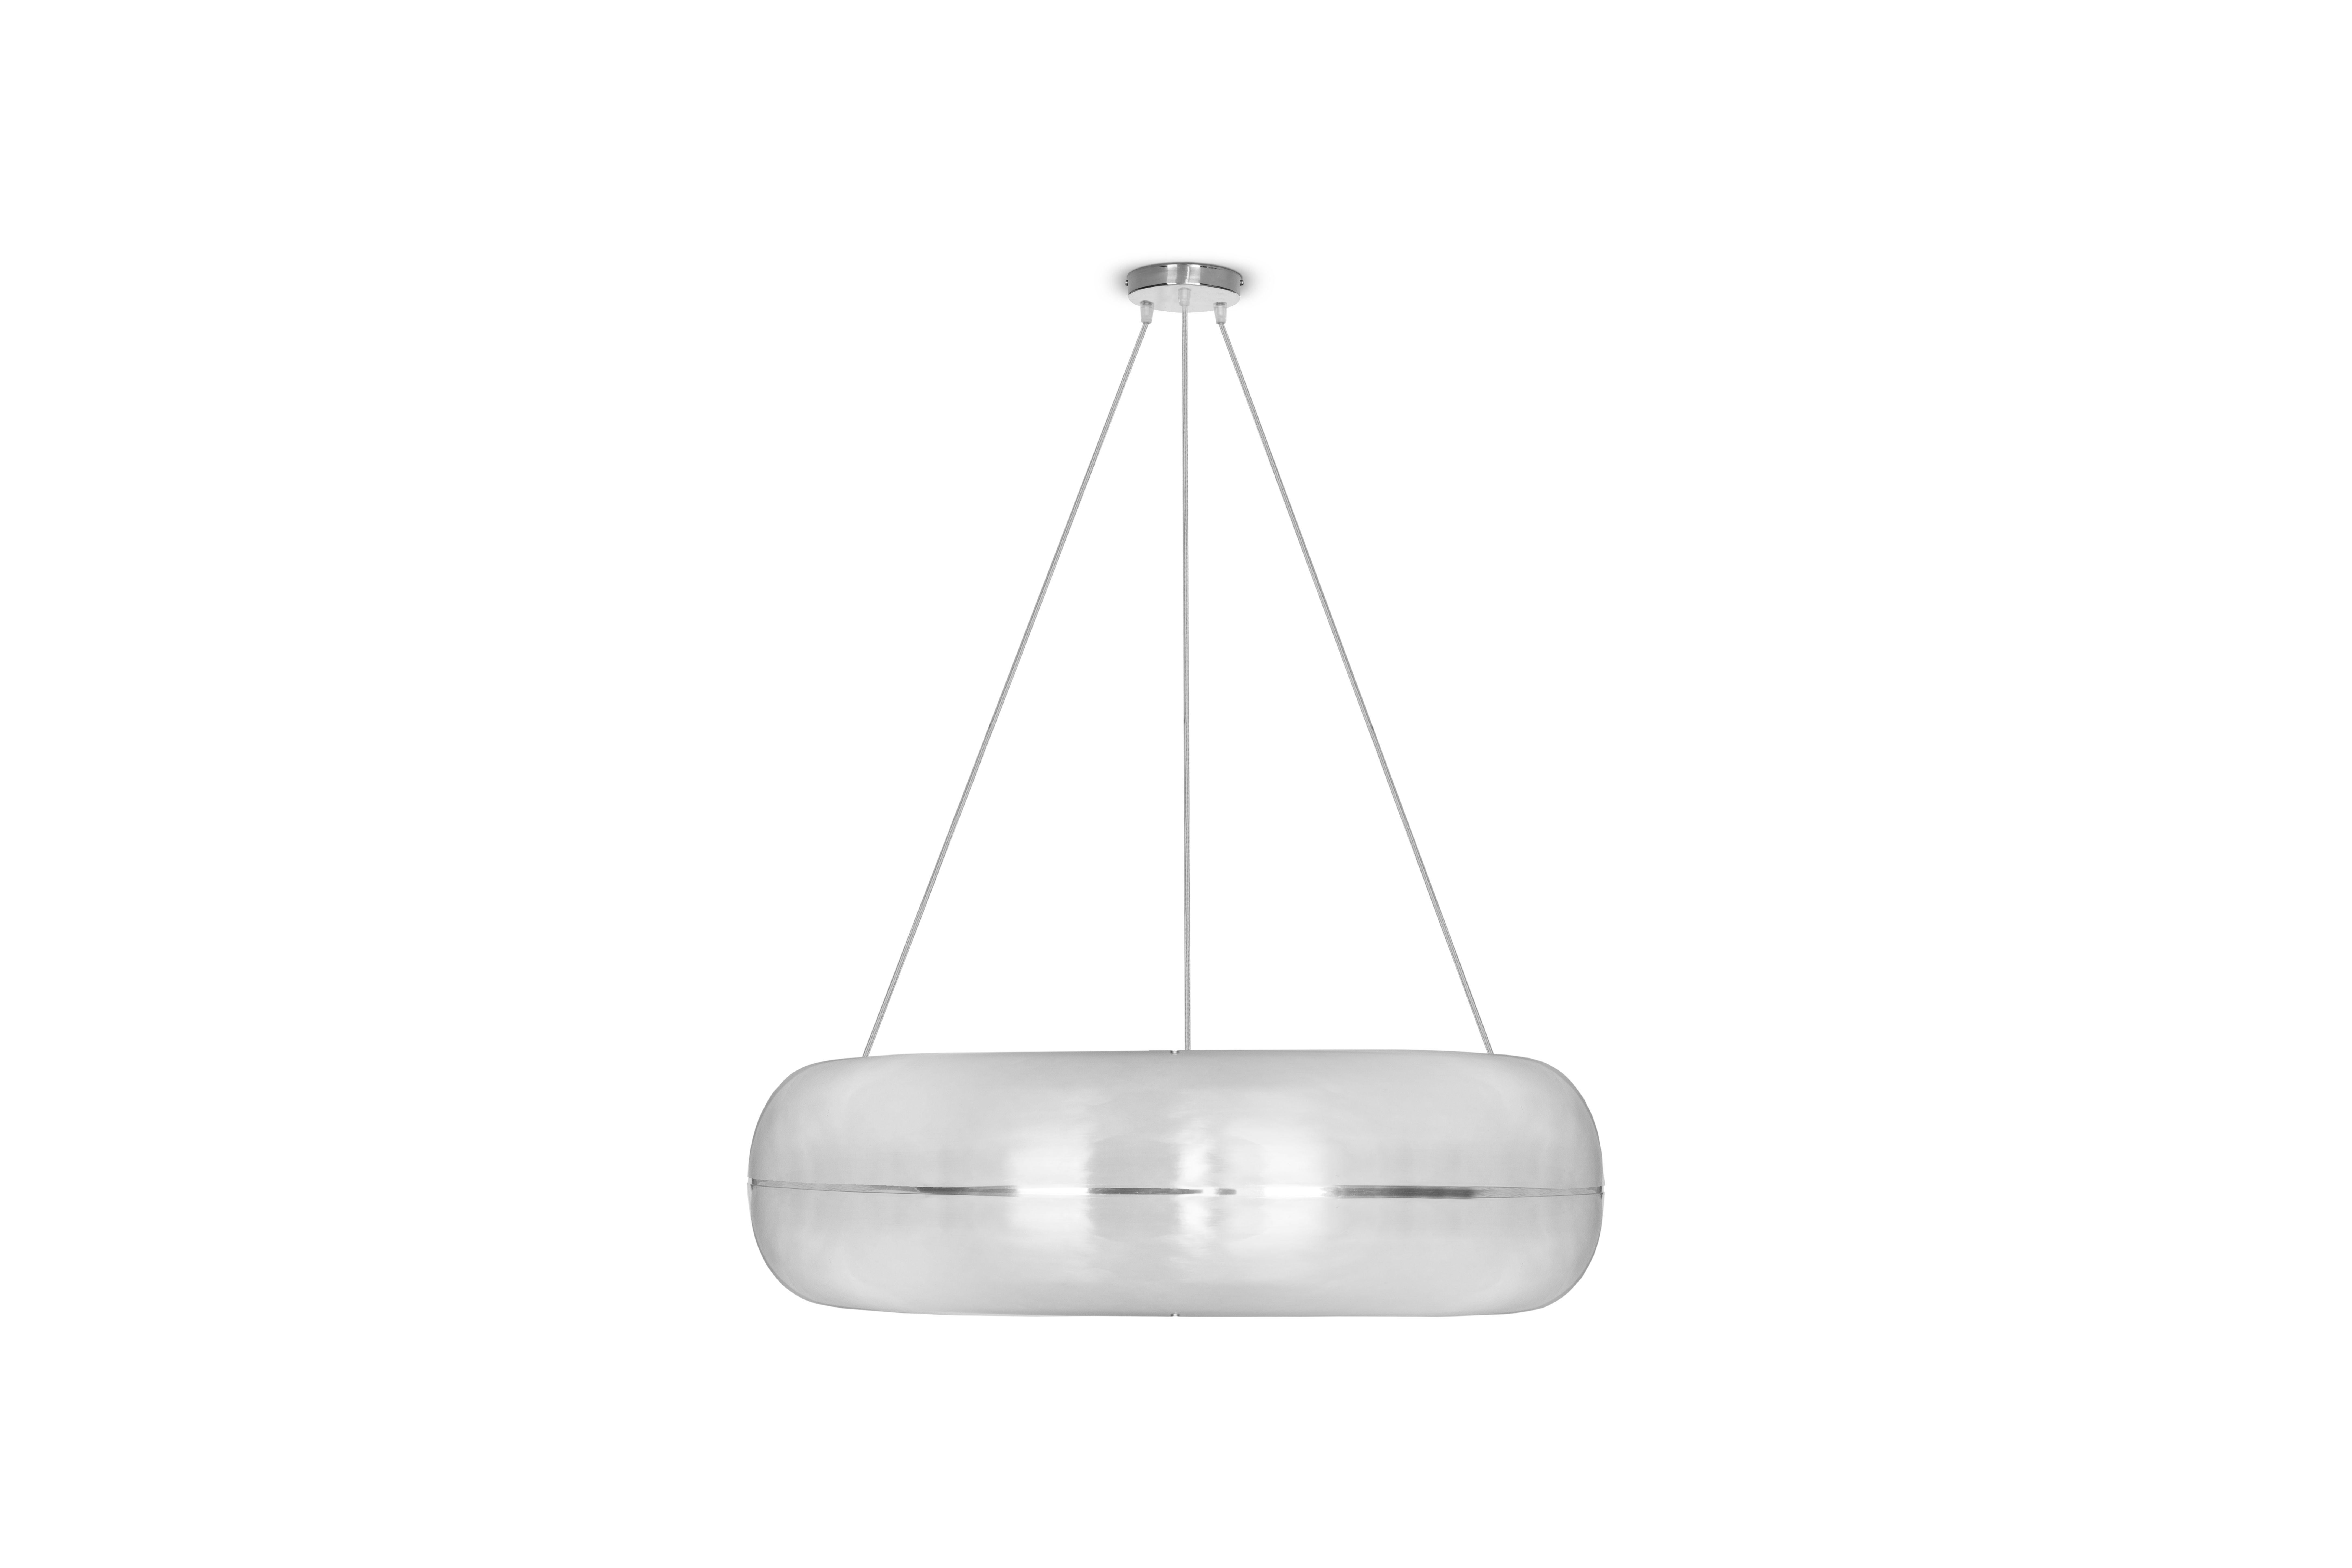 Marshmallow ceiling lamp, Royal Stranger
Dimensions: 17 x 57 x 57 cm 
Sizes for each element. The total height is adjustable.
Material: Brass (also available in Copper or Stainless Steel in polished or brushed finish.).

Composed of three